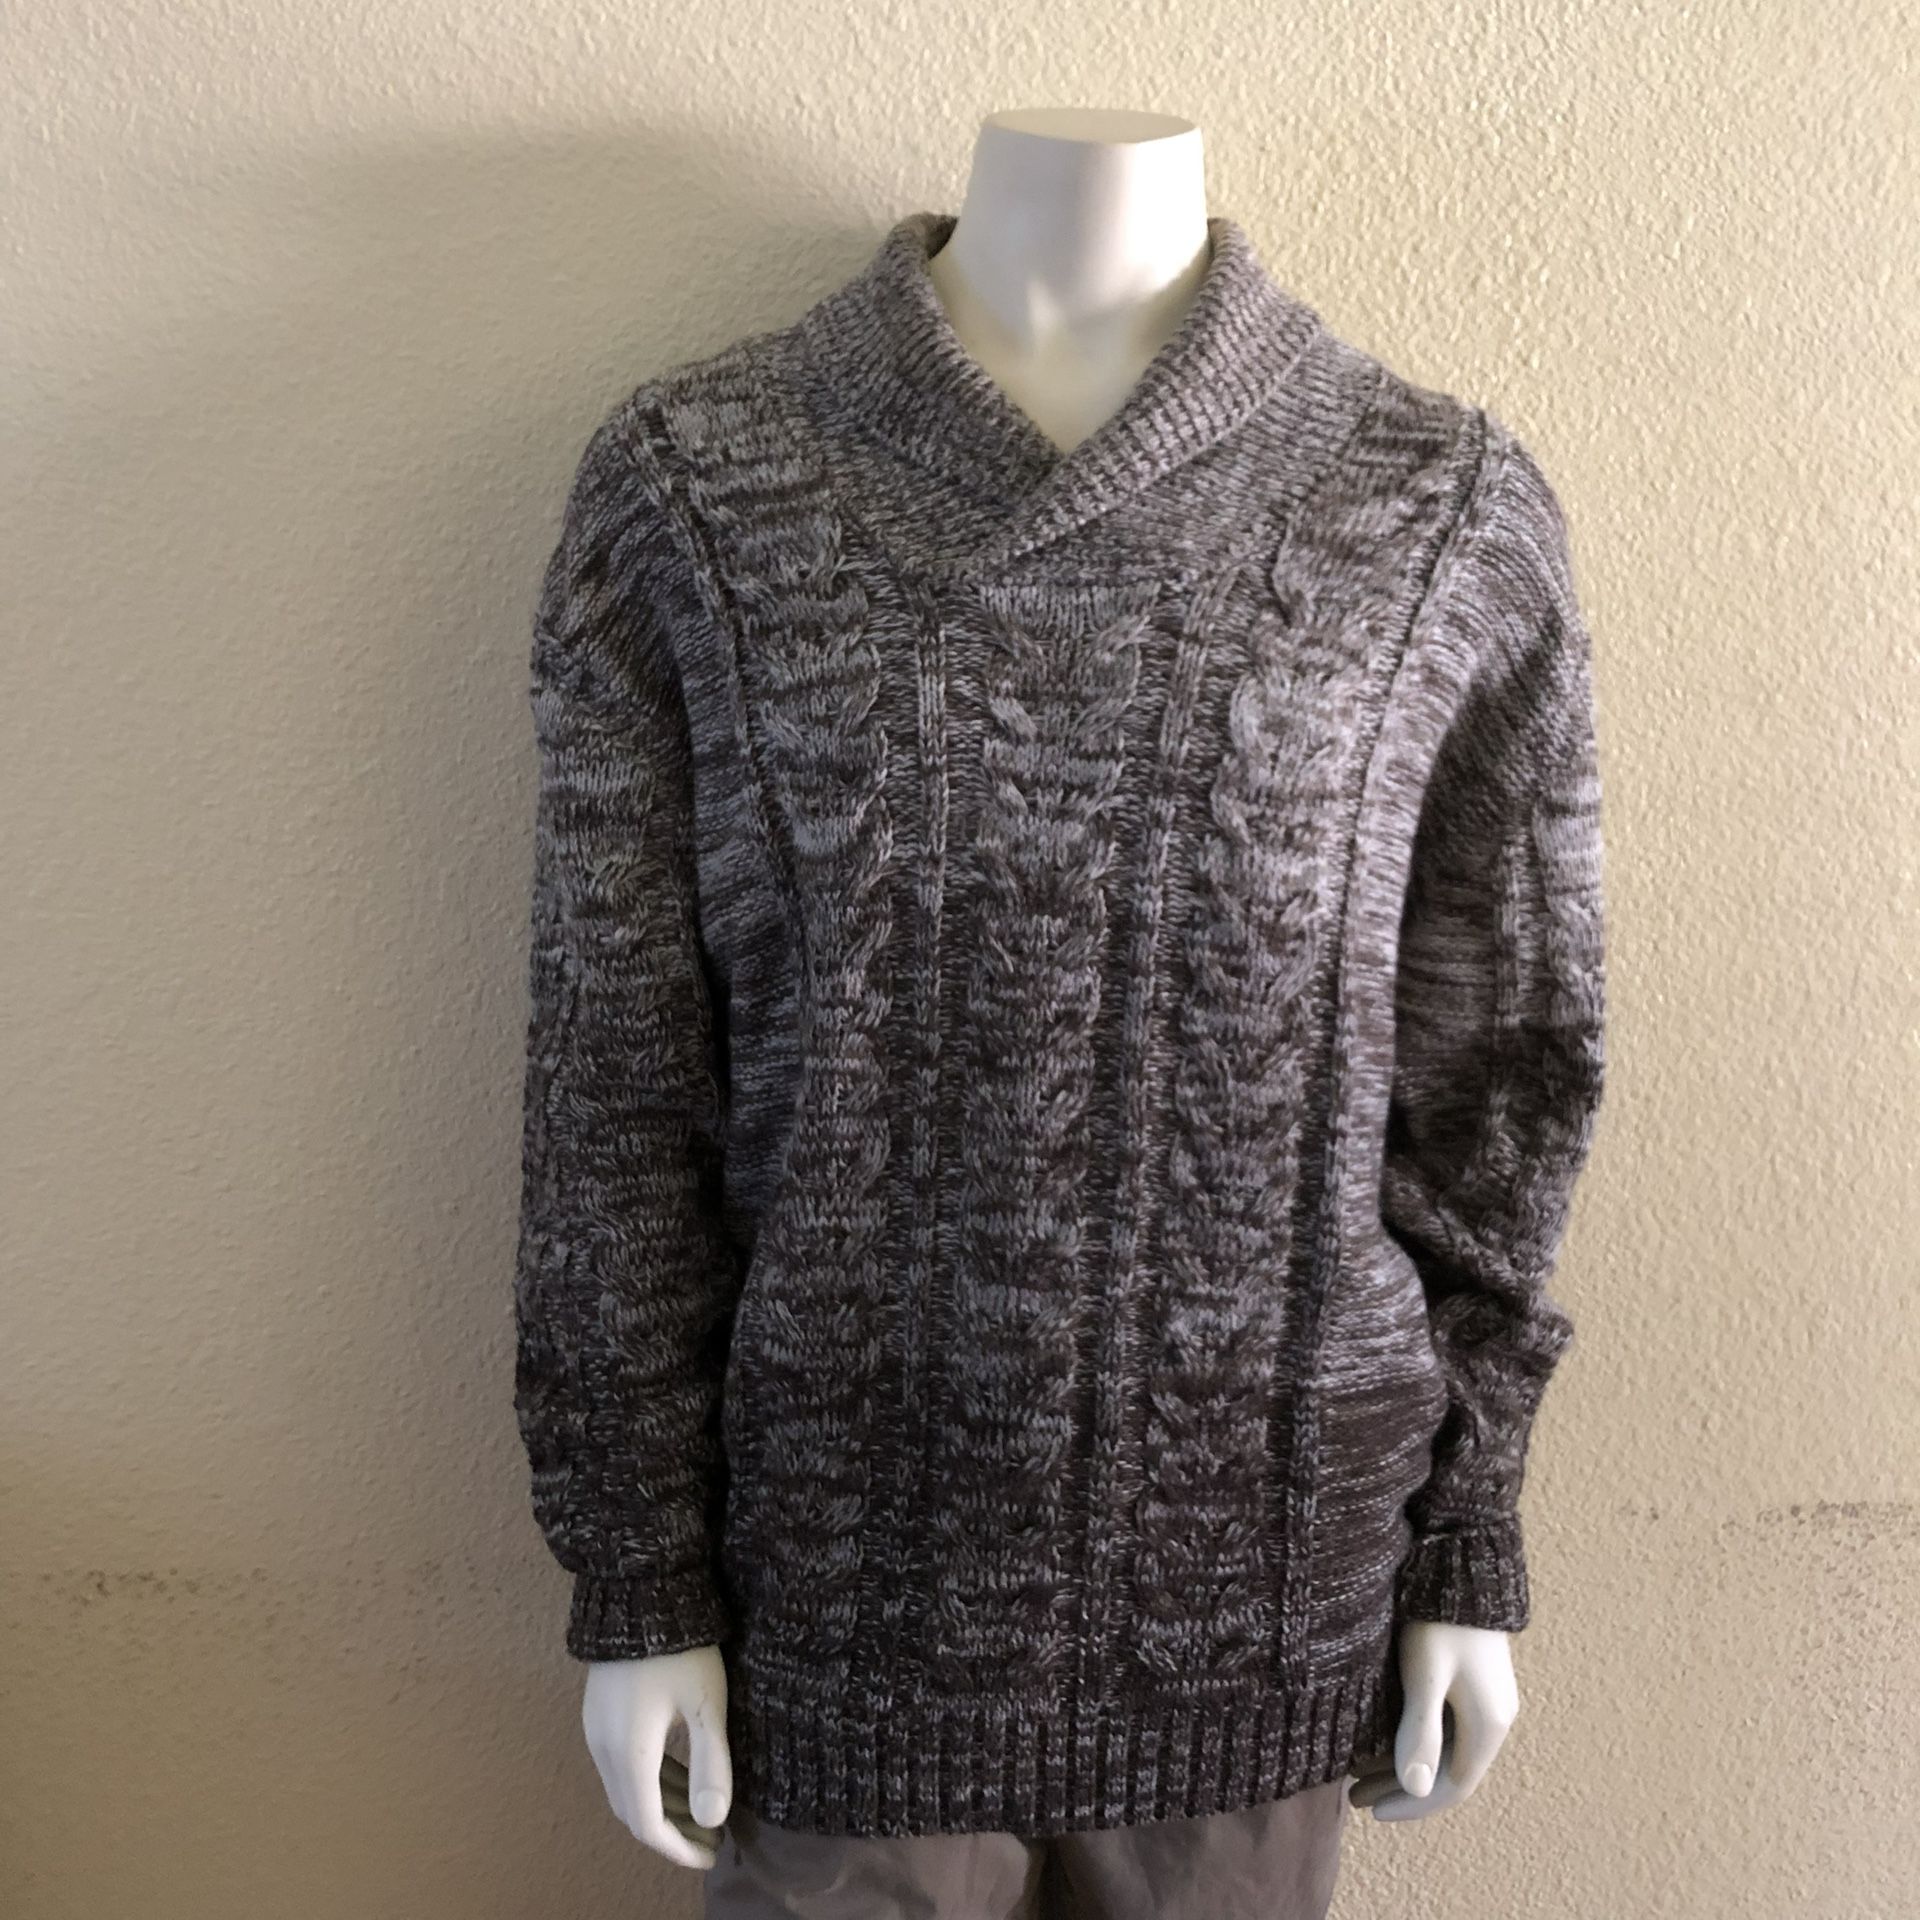 Park Slope shawl collar pullover sweater.